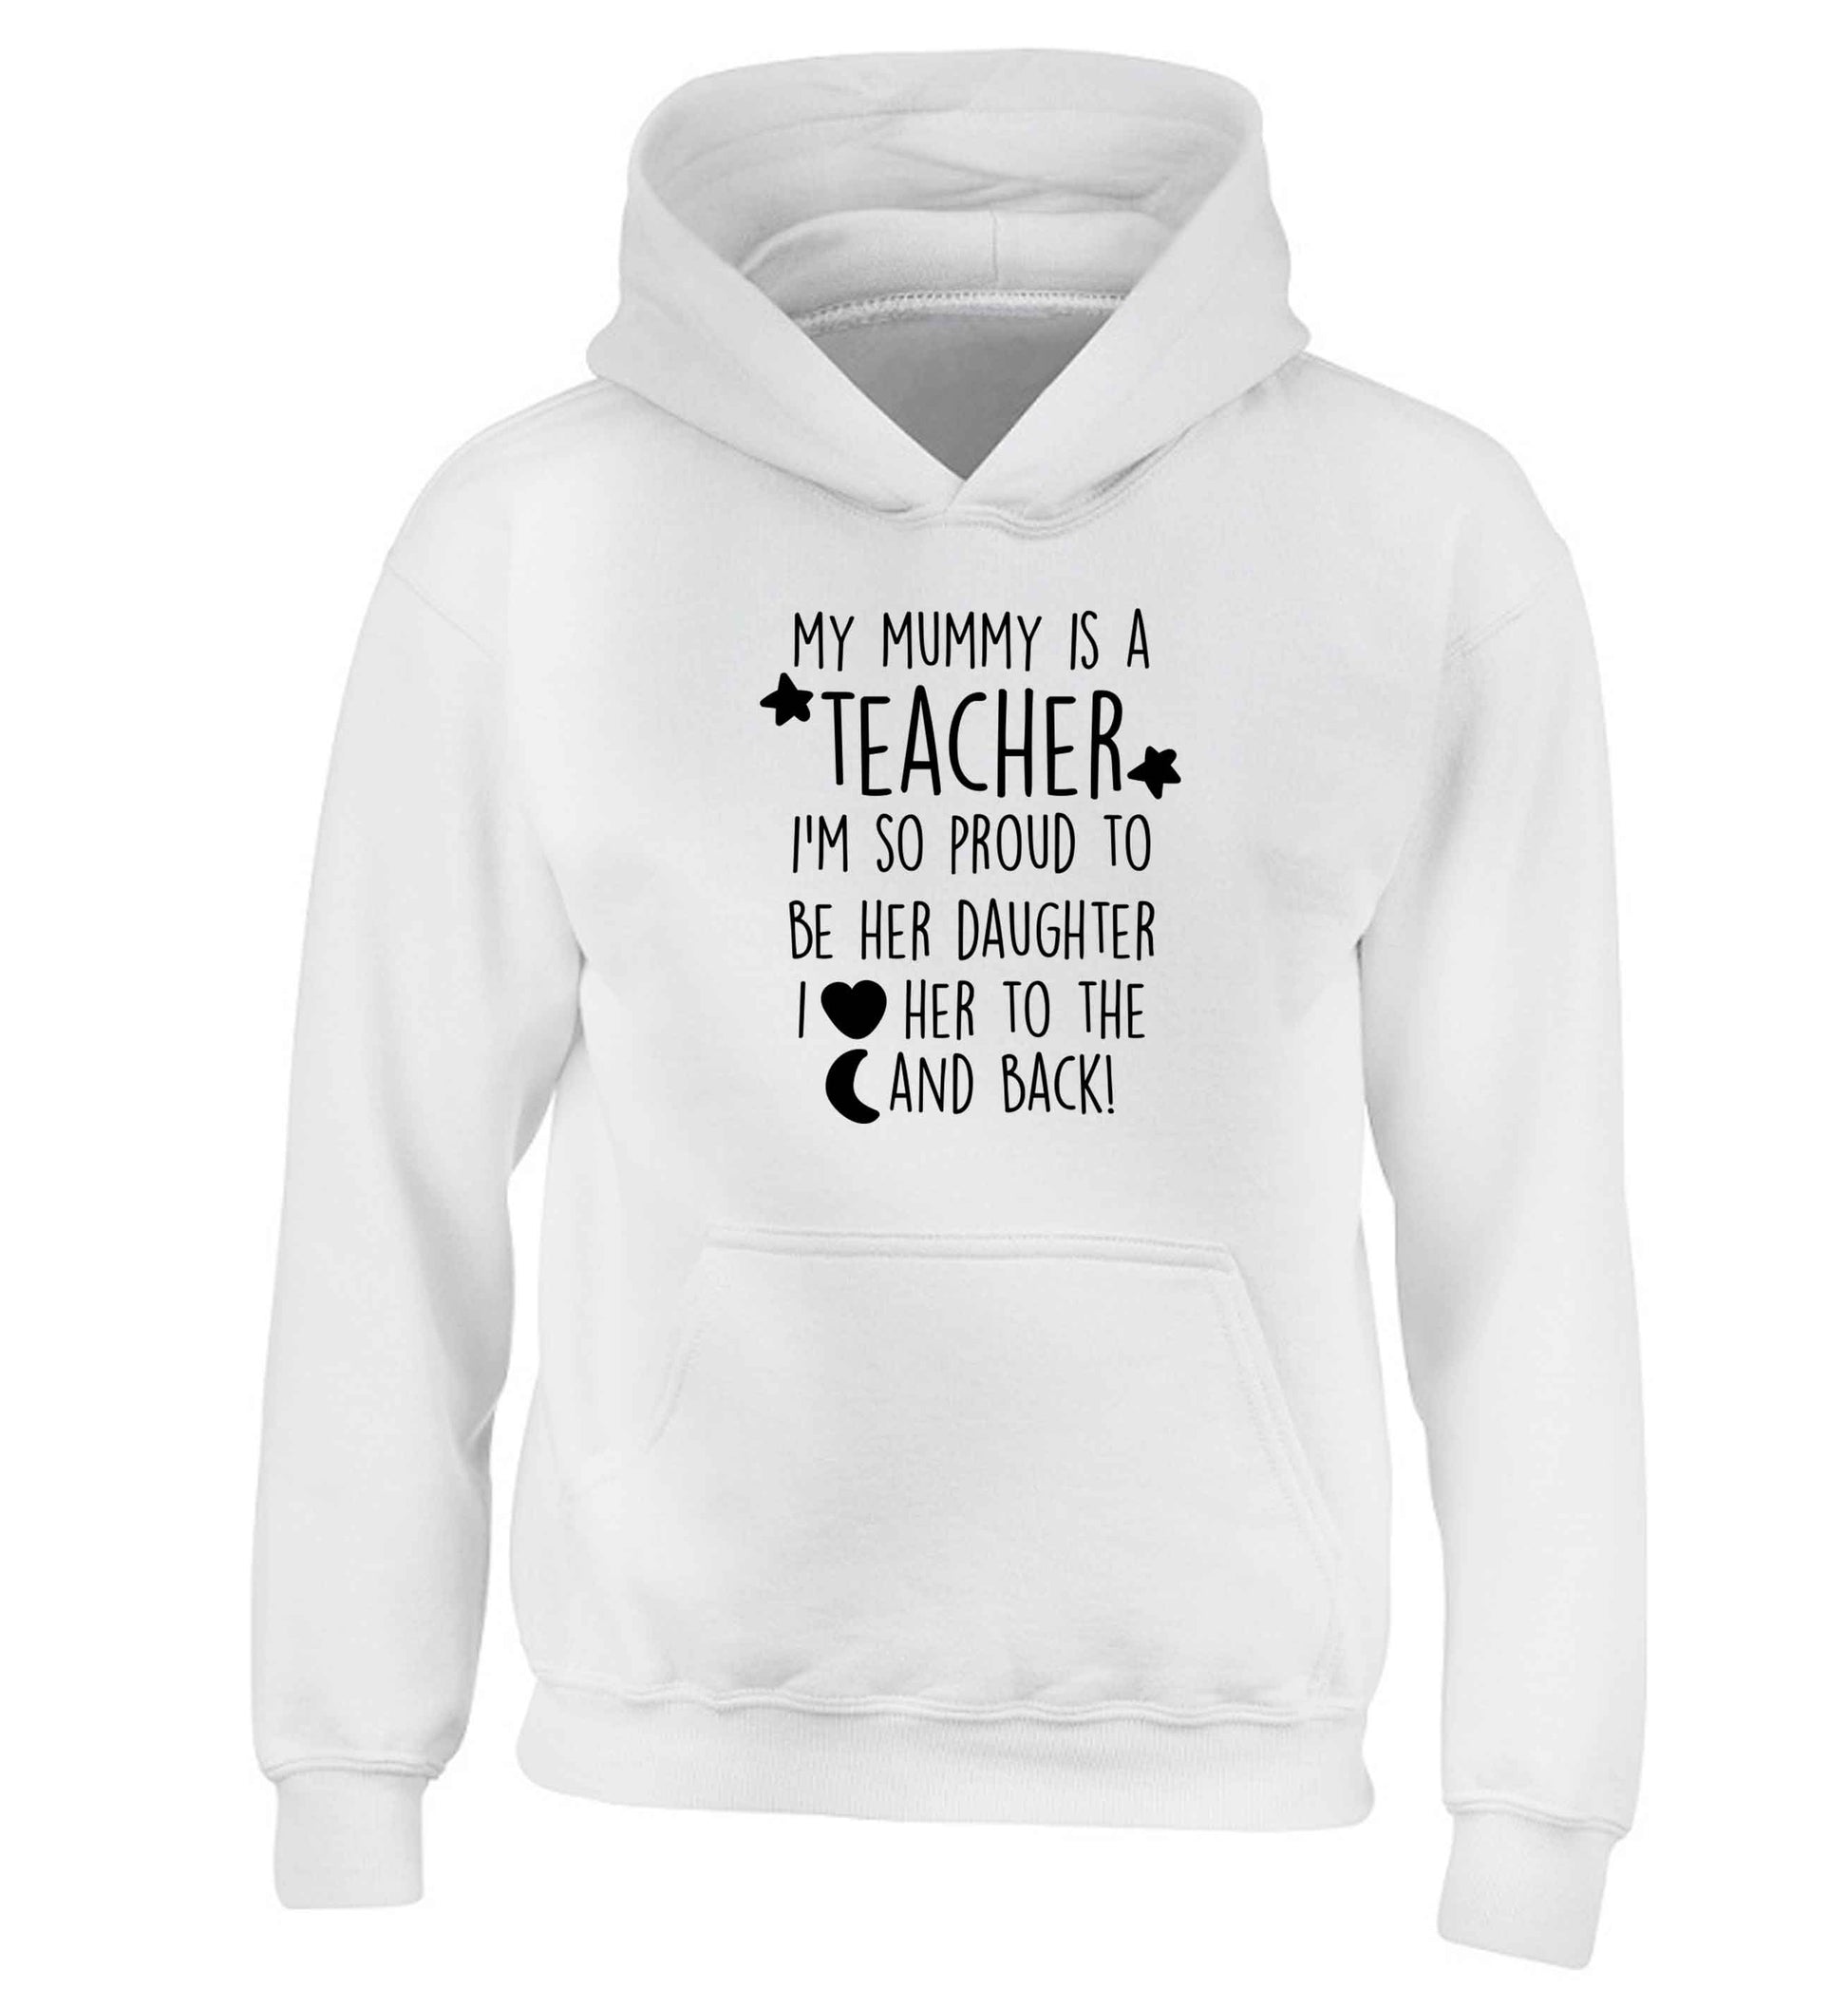 My mummy is a teacher I'm so proud to be her daughter I love her to the moon and back children's white hoodie 12-13 Years